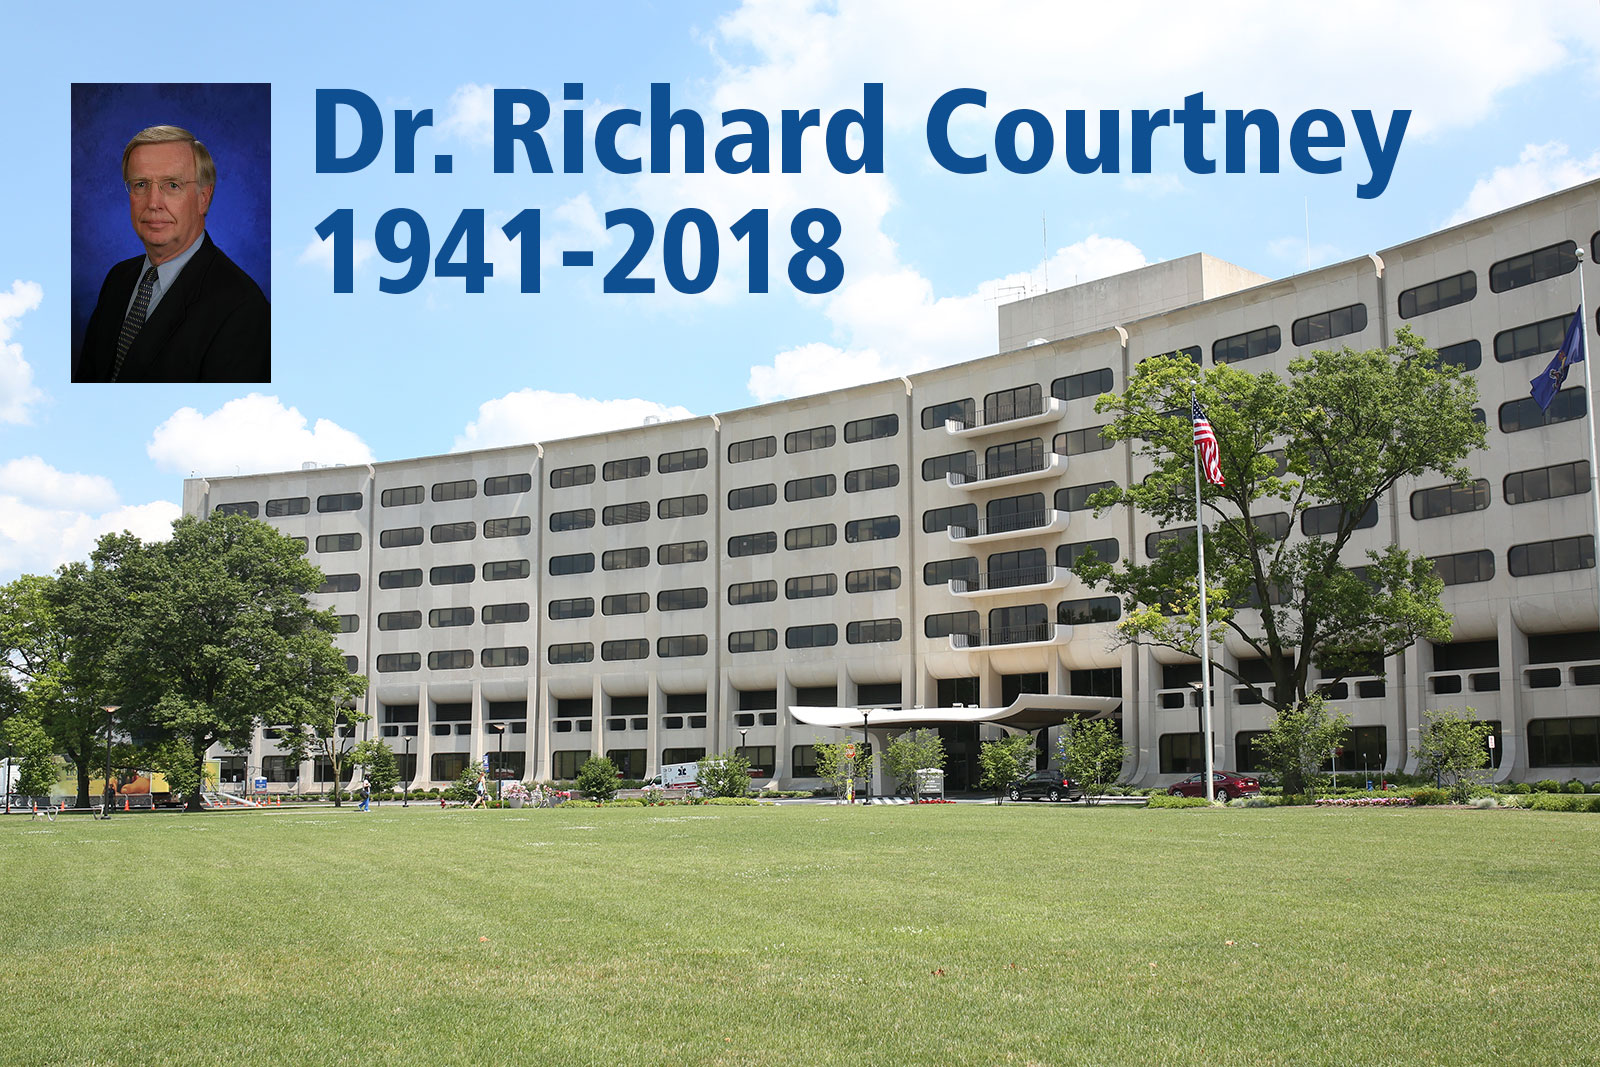 Dr. Richard Courtney was a distinguished professor and chair of the Department of Microbiology and Immunology at Penn State College of Medicine from 1991 to 2012. Dr. Courtney's photo pictures him wearing a collared shirt, jacket and tie, and his photo is overlaid on an image of Penn State College of Medicine's Crescent building. The words Dr. Richard Courtney, 1941-2018, appear at the top of the photo.